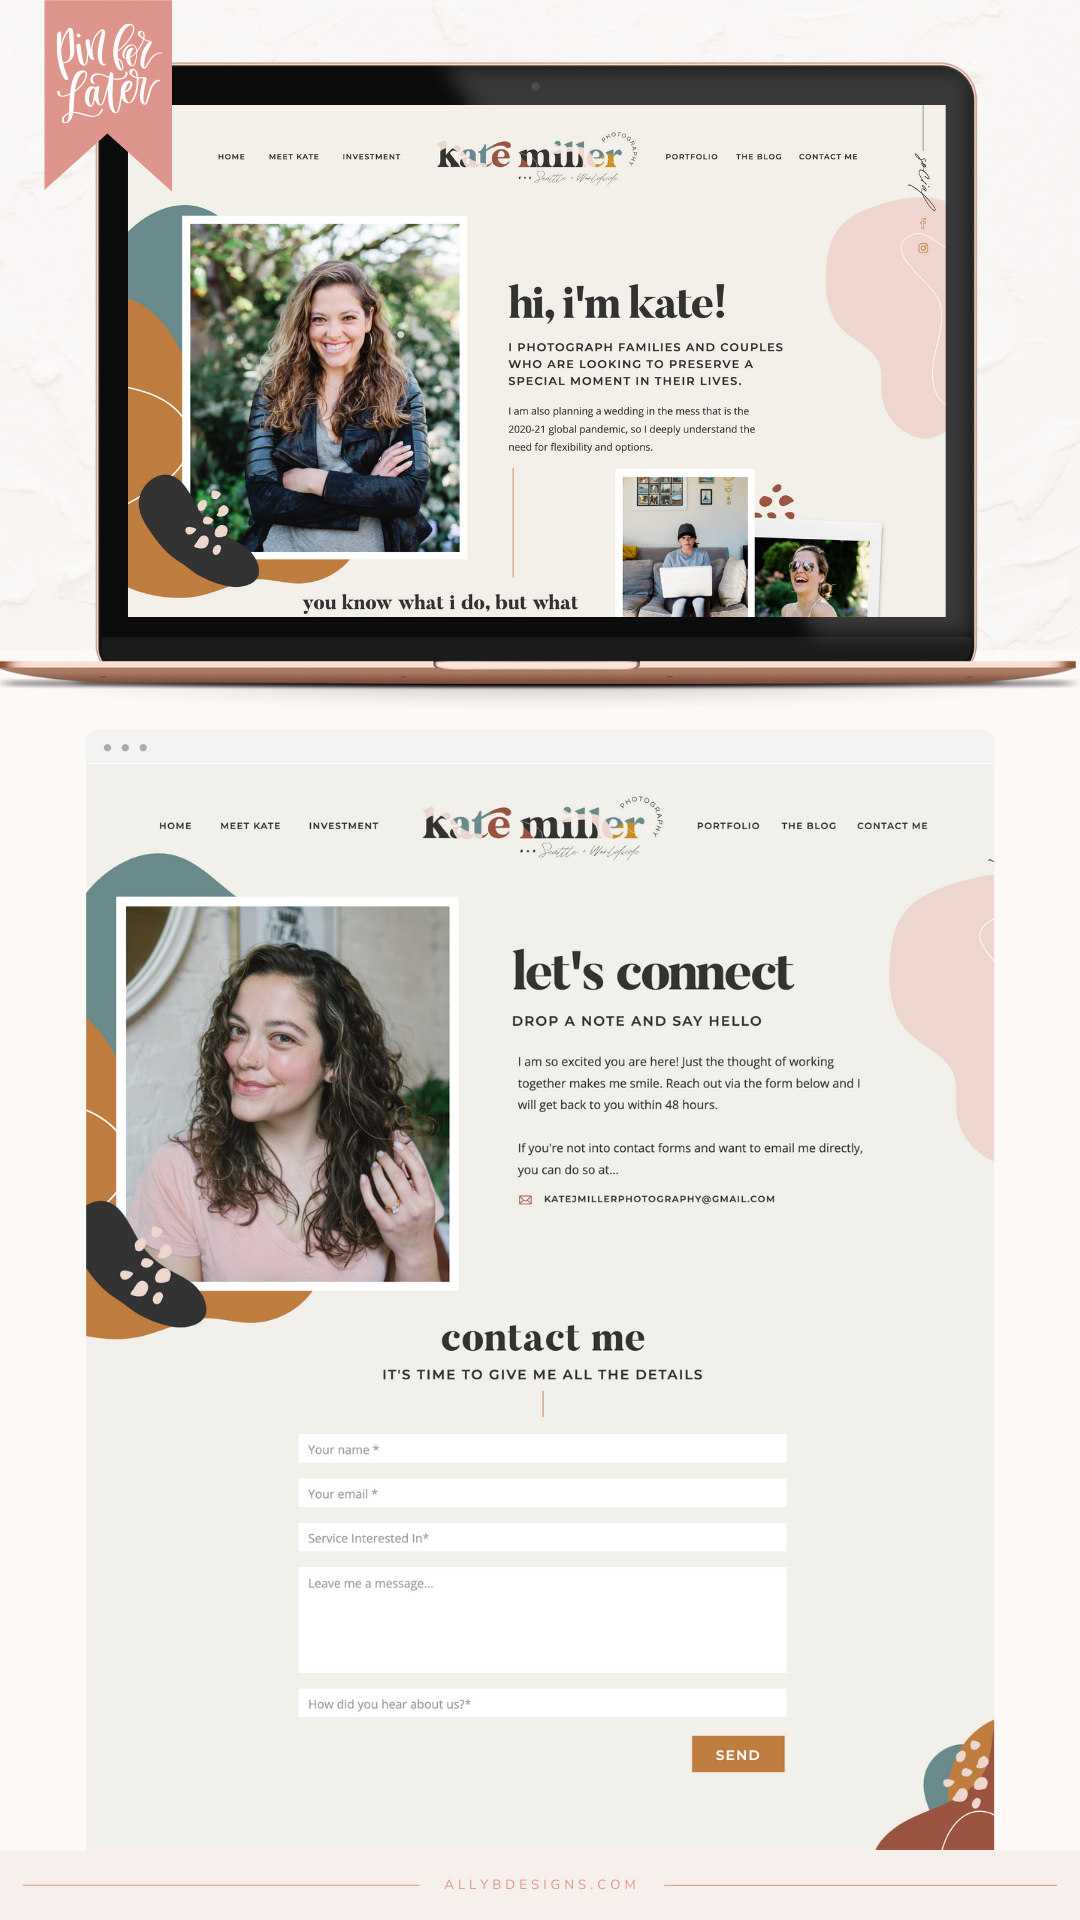 Client Launch: A Wedding Photographer Website About Page for Kate Miller Photography by Ally B Designs